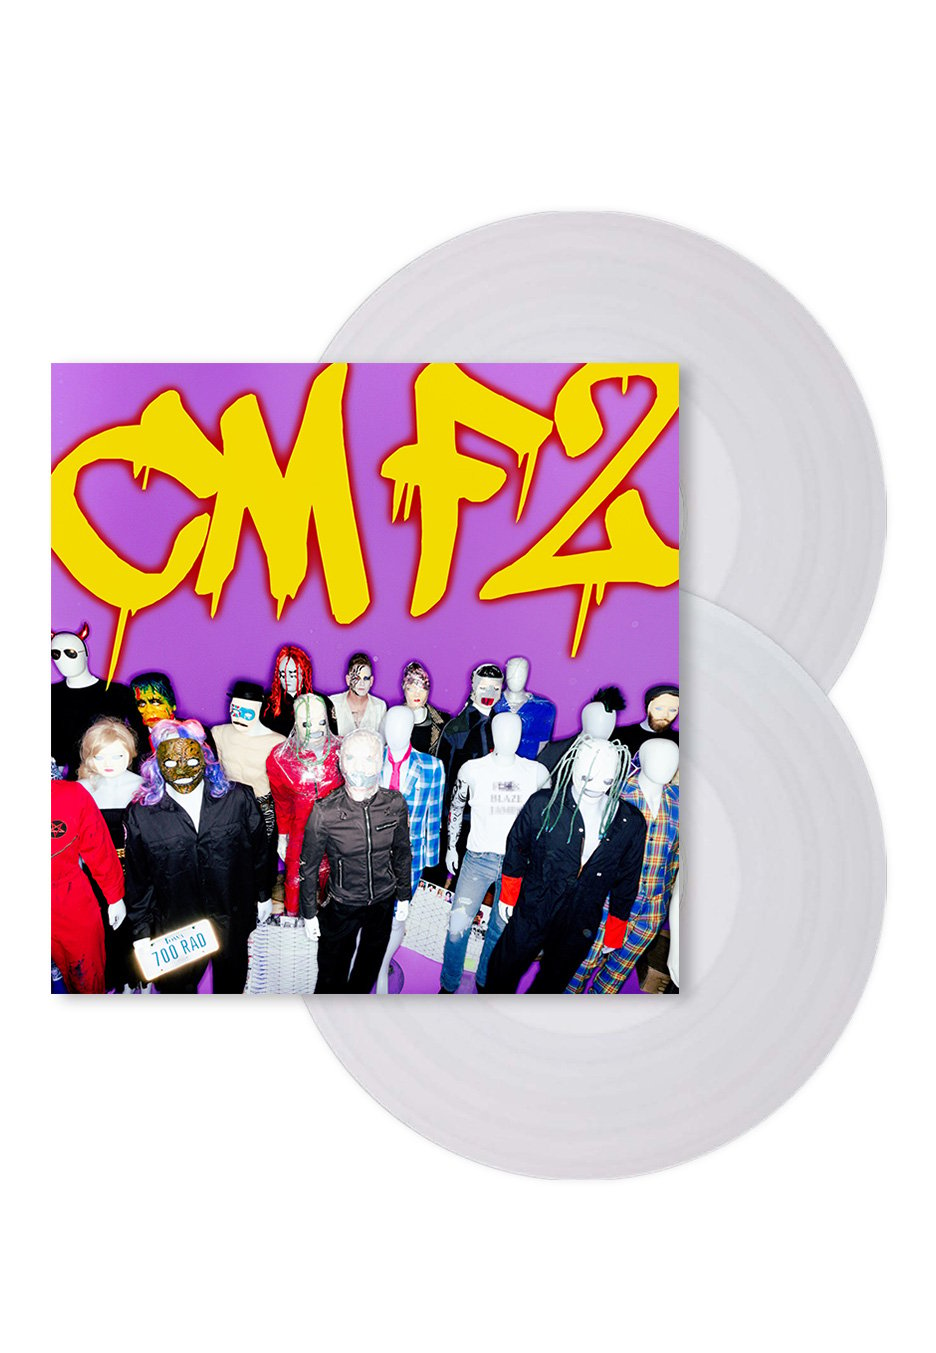 Corey Taylor - CMF2 Translucent Milky Clear - Colored 2 Vinyl